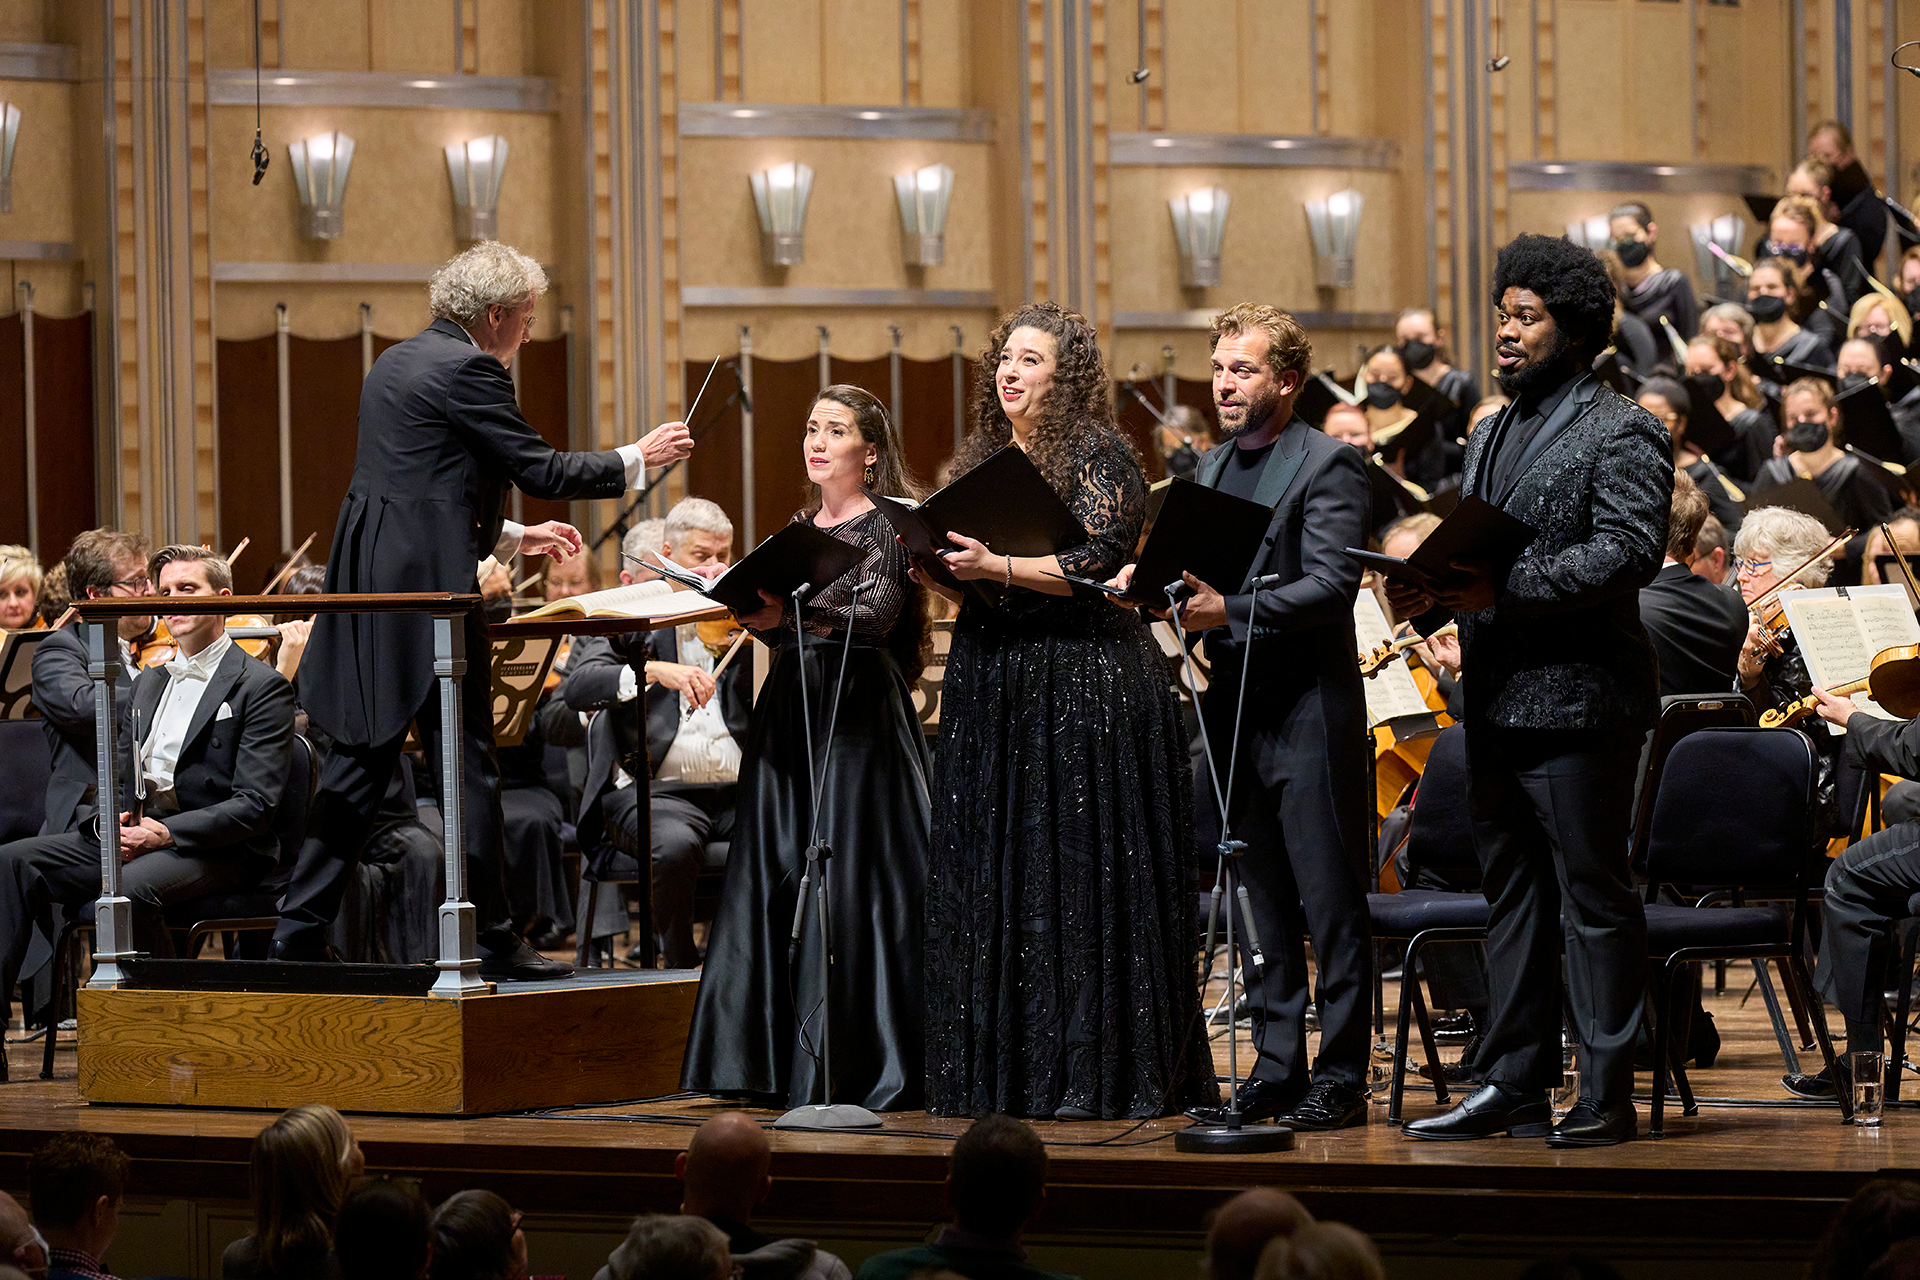 Four singers perform in front of the Orchestra